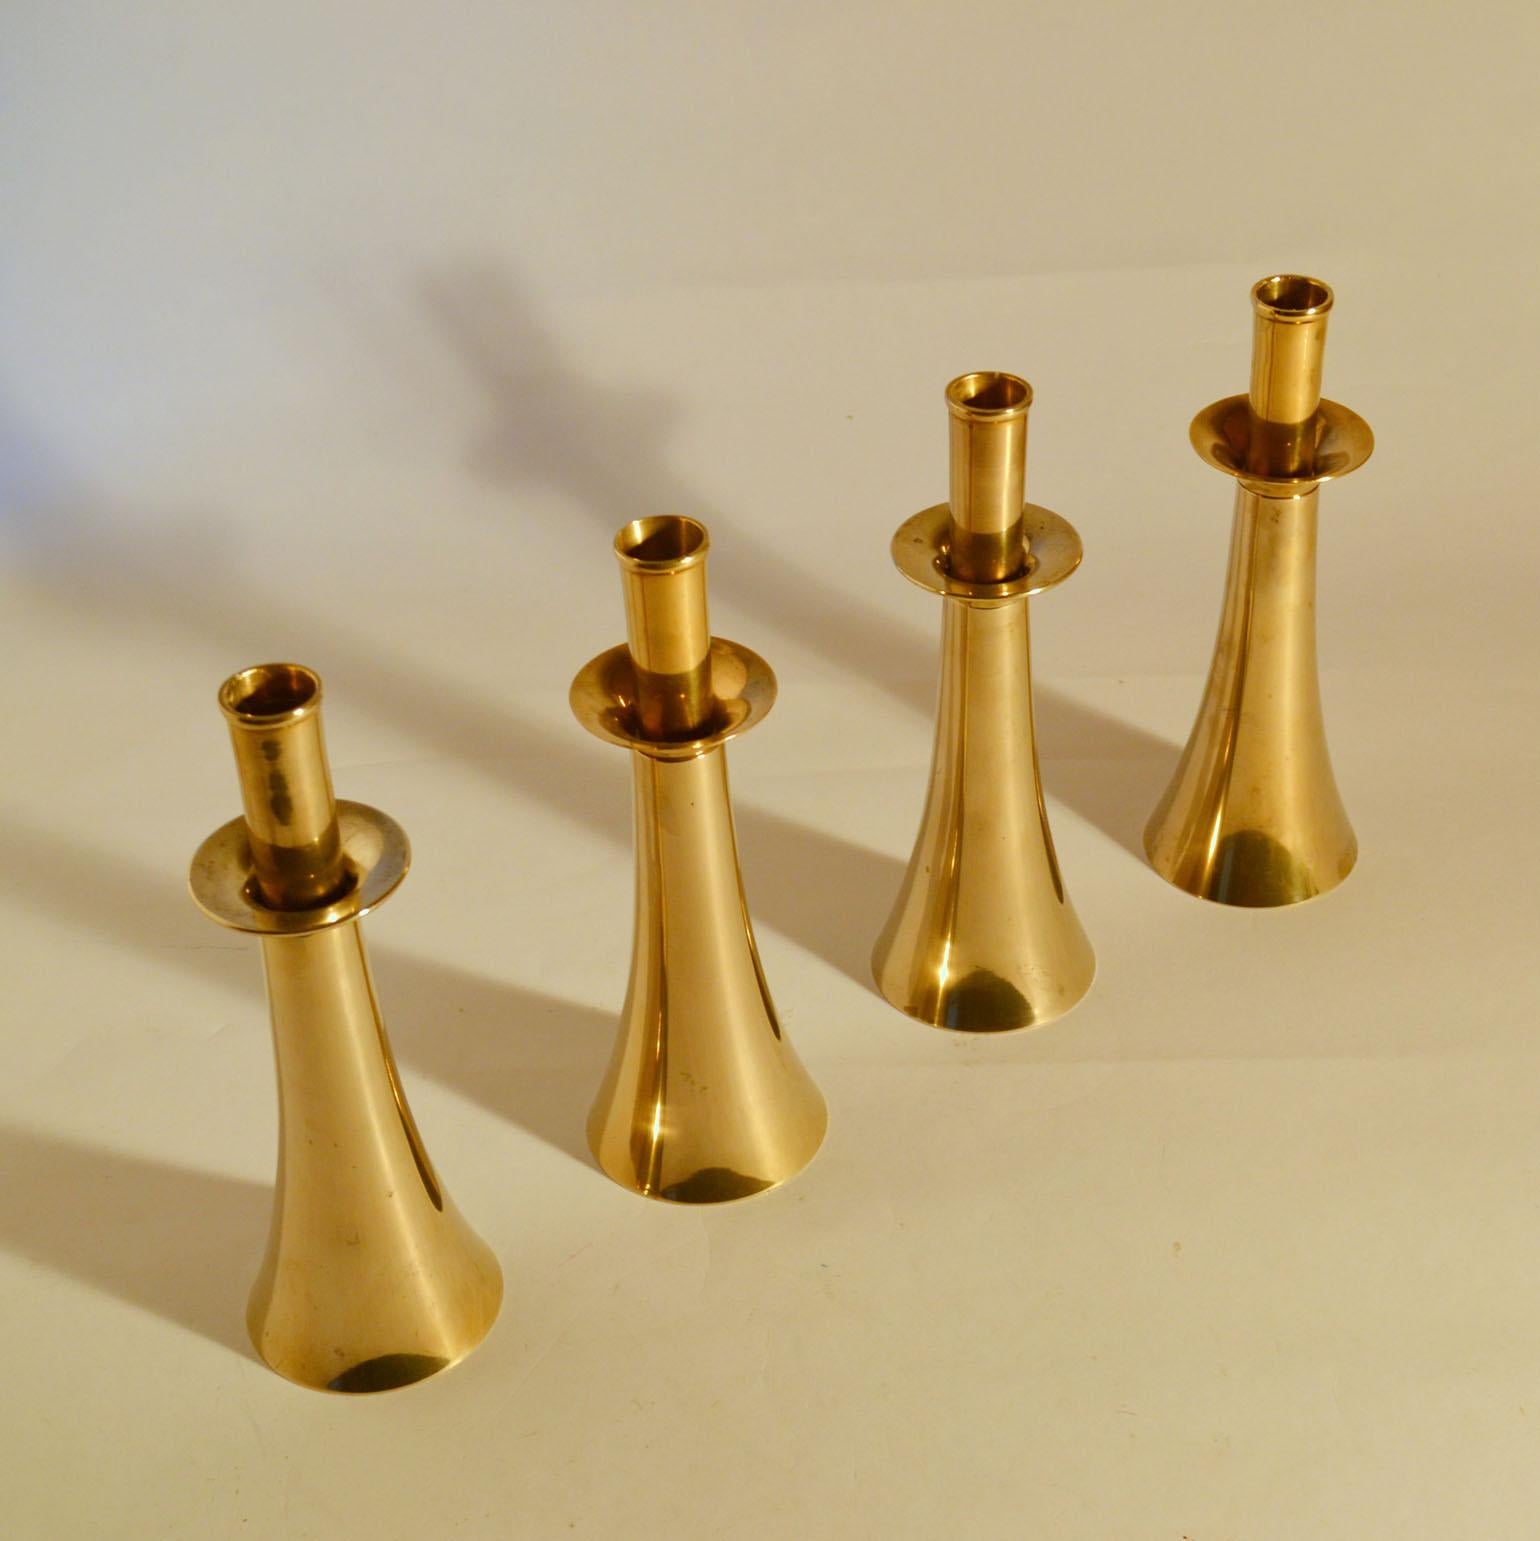 Set of four Harald Quistgaard (1919-2008) Danish bell shaped bronze cast candle holders for regular size candles.
Measures: Height with the candles included 44 cm.